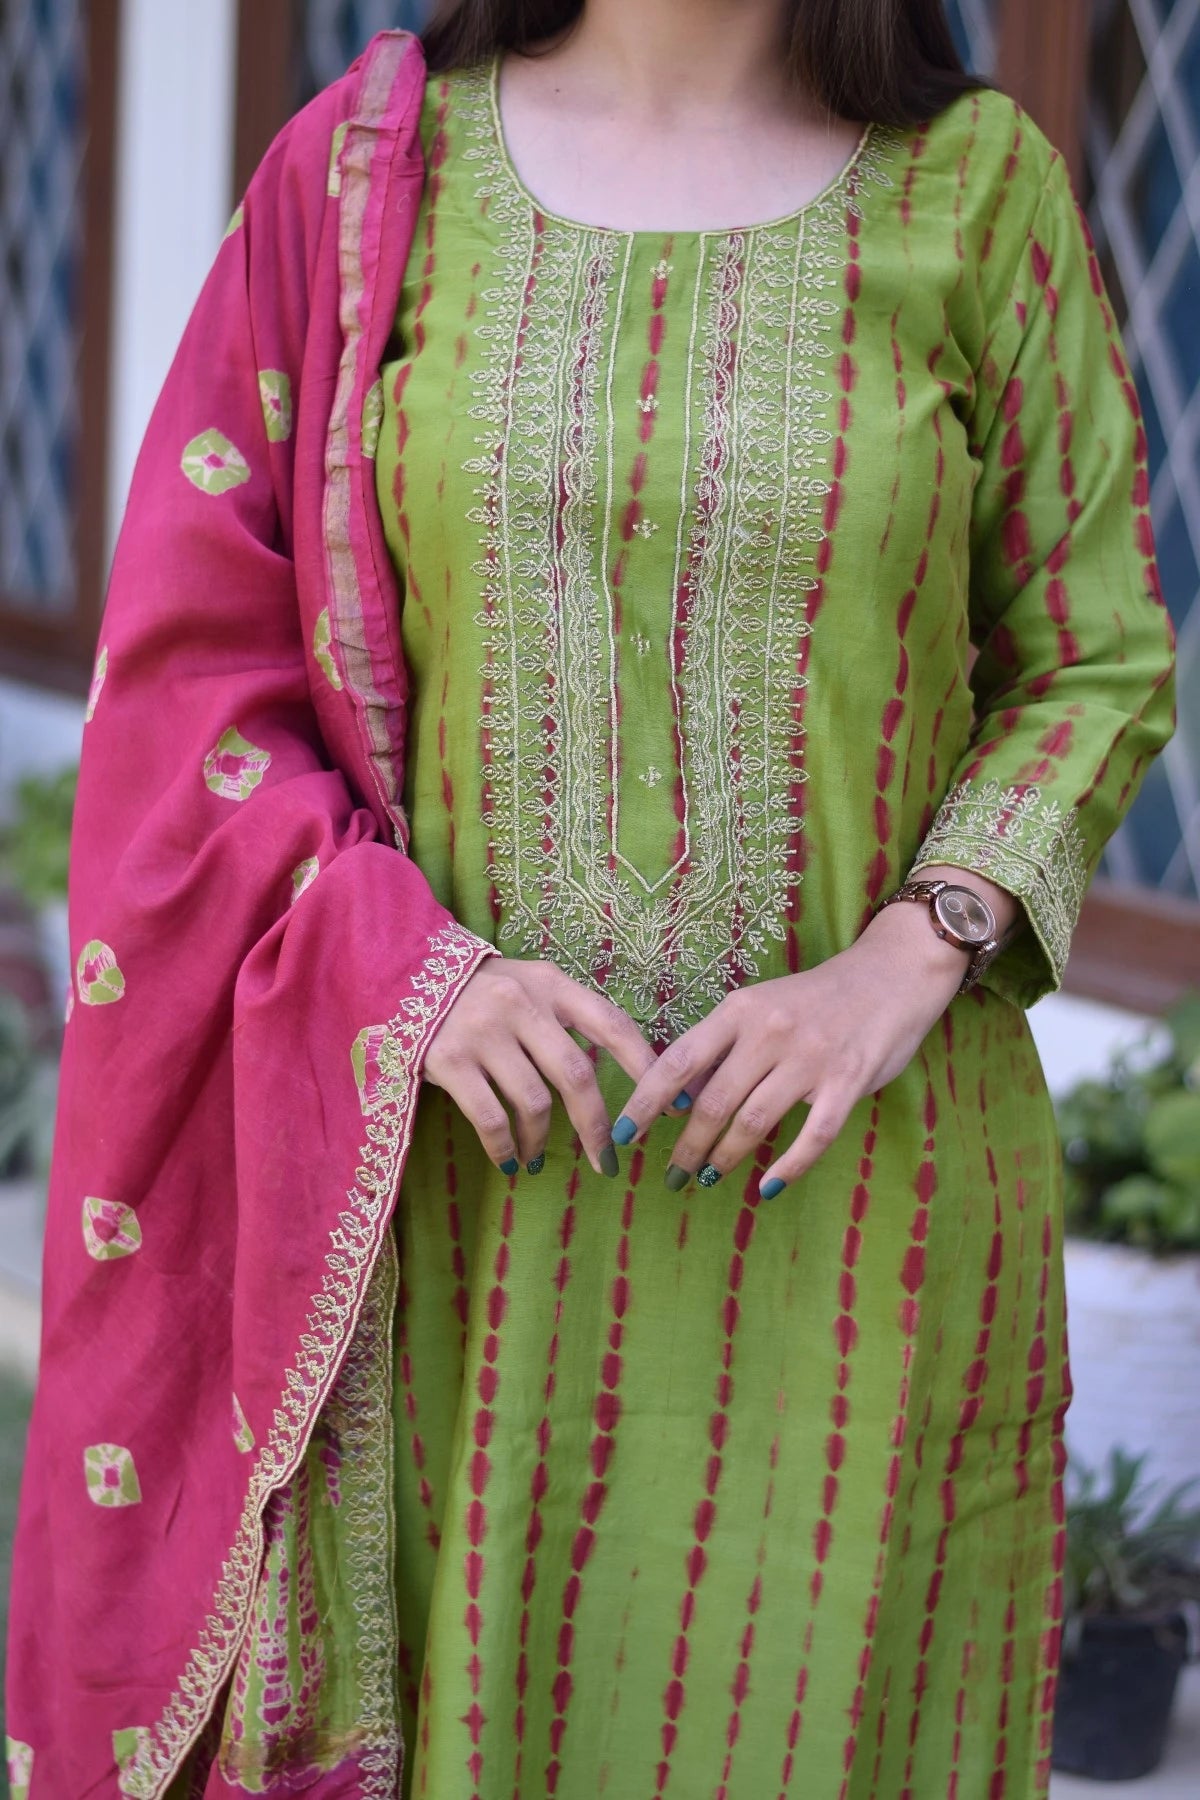 A stunning lady wearing a zari hand work suit with intricate patterns that showcase the rich cultural heritage of India.